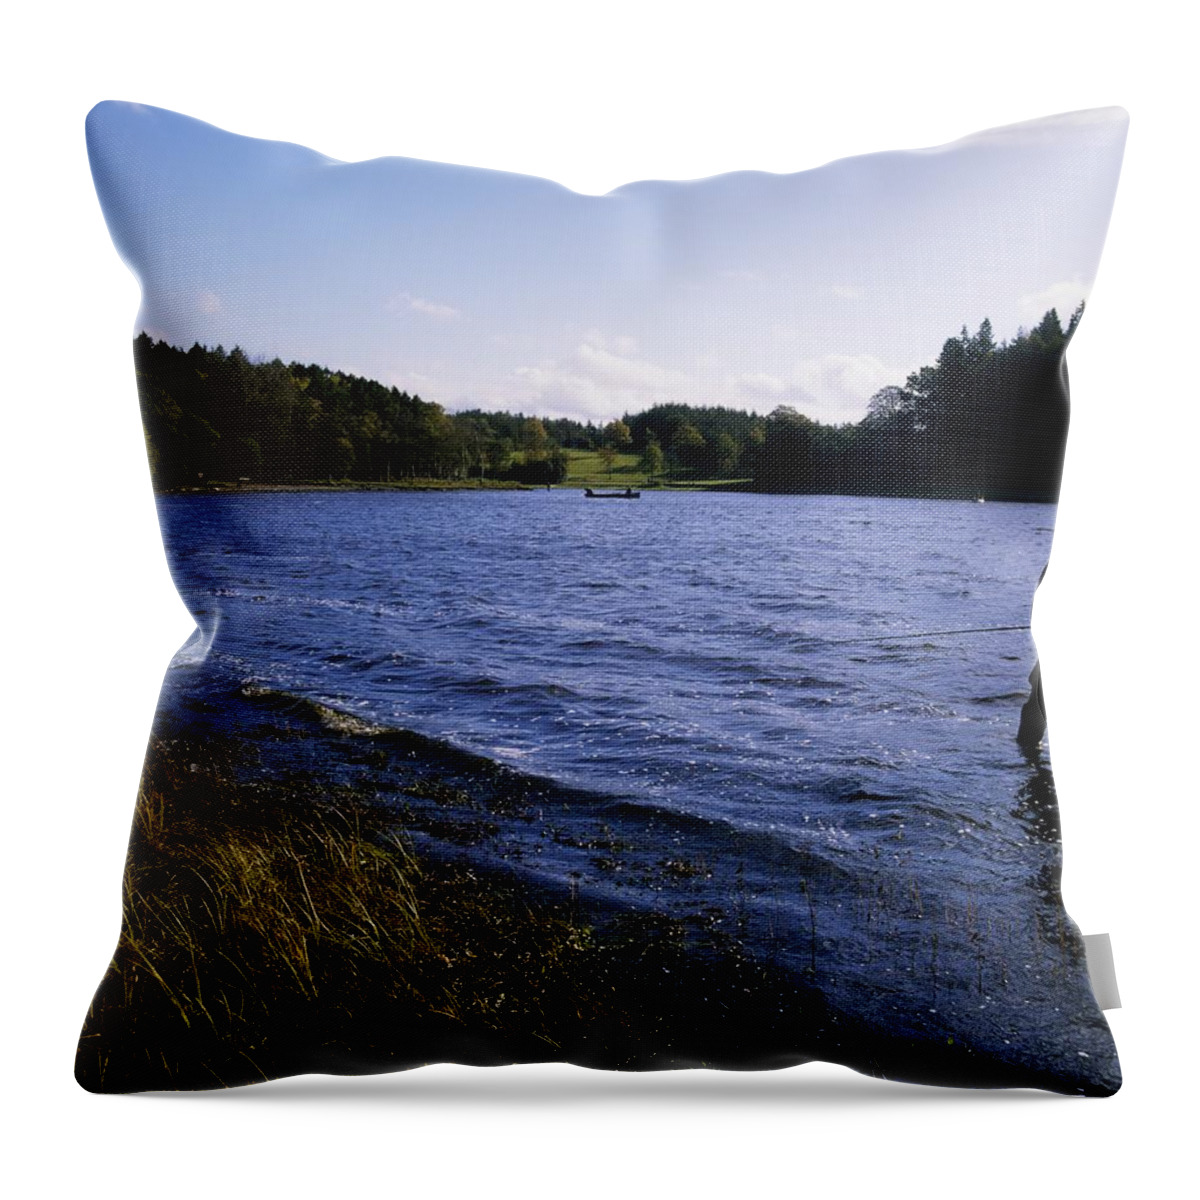 Background People Throw Pillow featuring the photograph Killykeen Forest Park, Co Cavan by The Irish Image Collection 